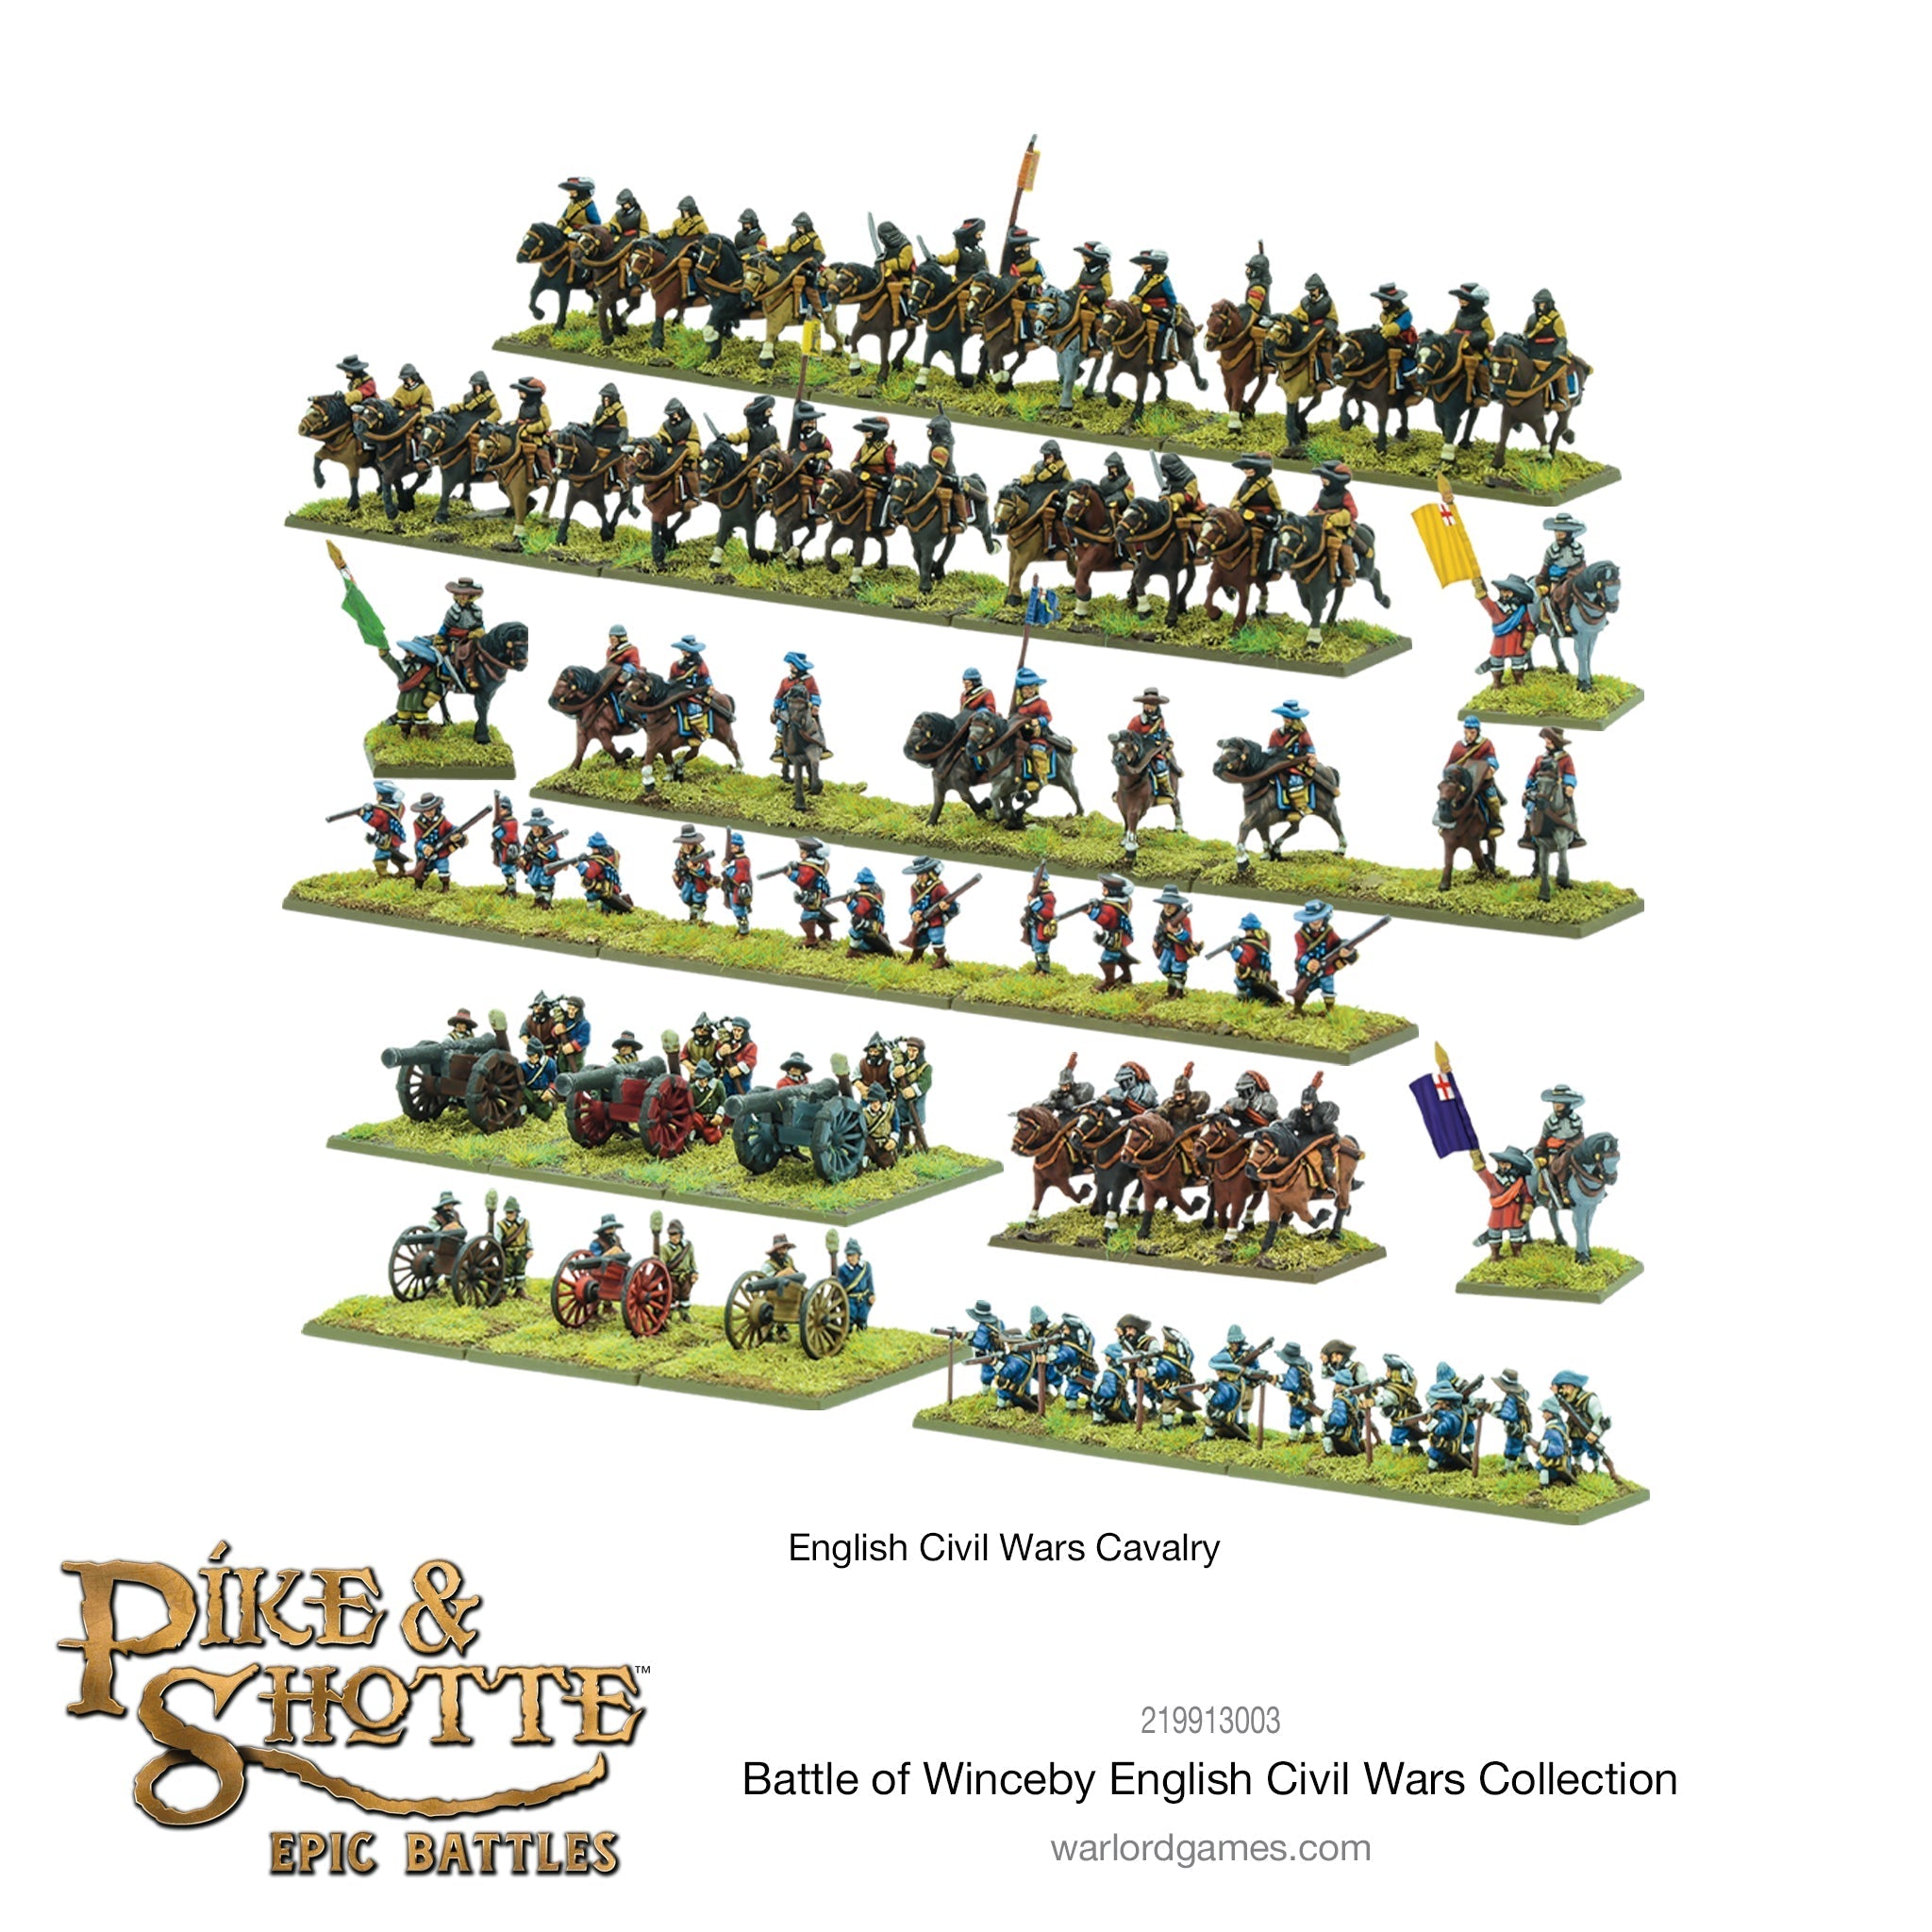 Pike & Shotte Epic Battles - Battle of Winceby English Civil Wars Collection